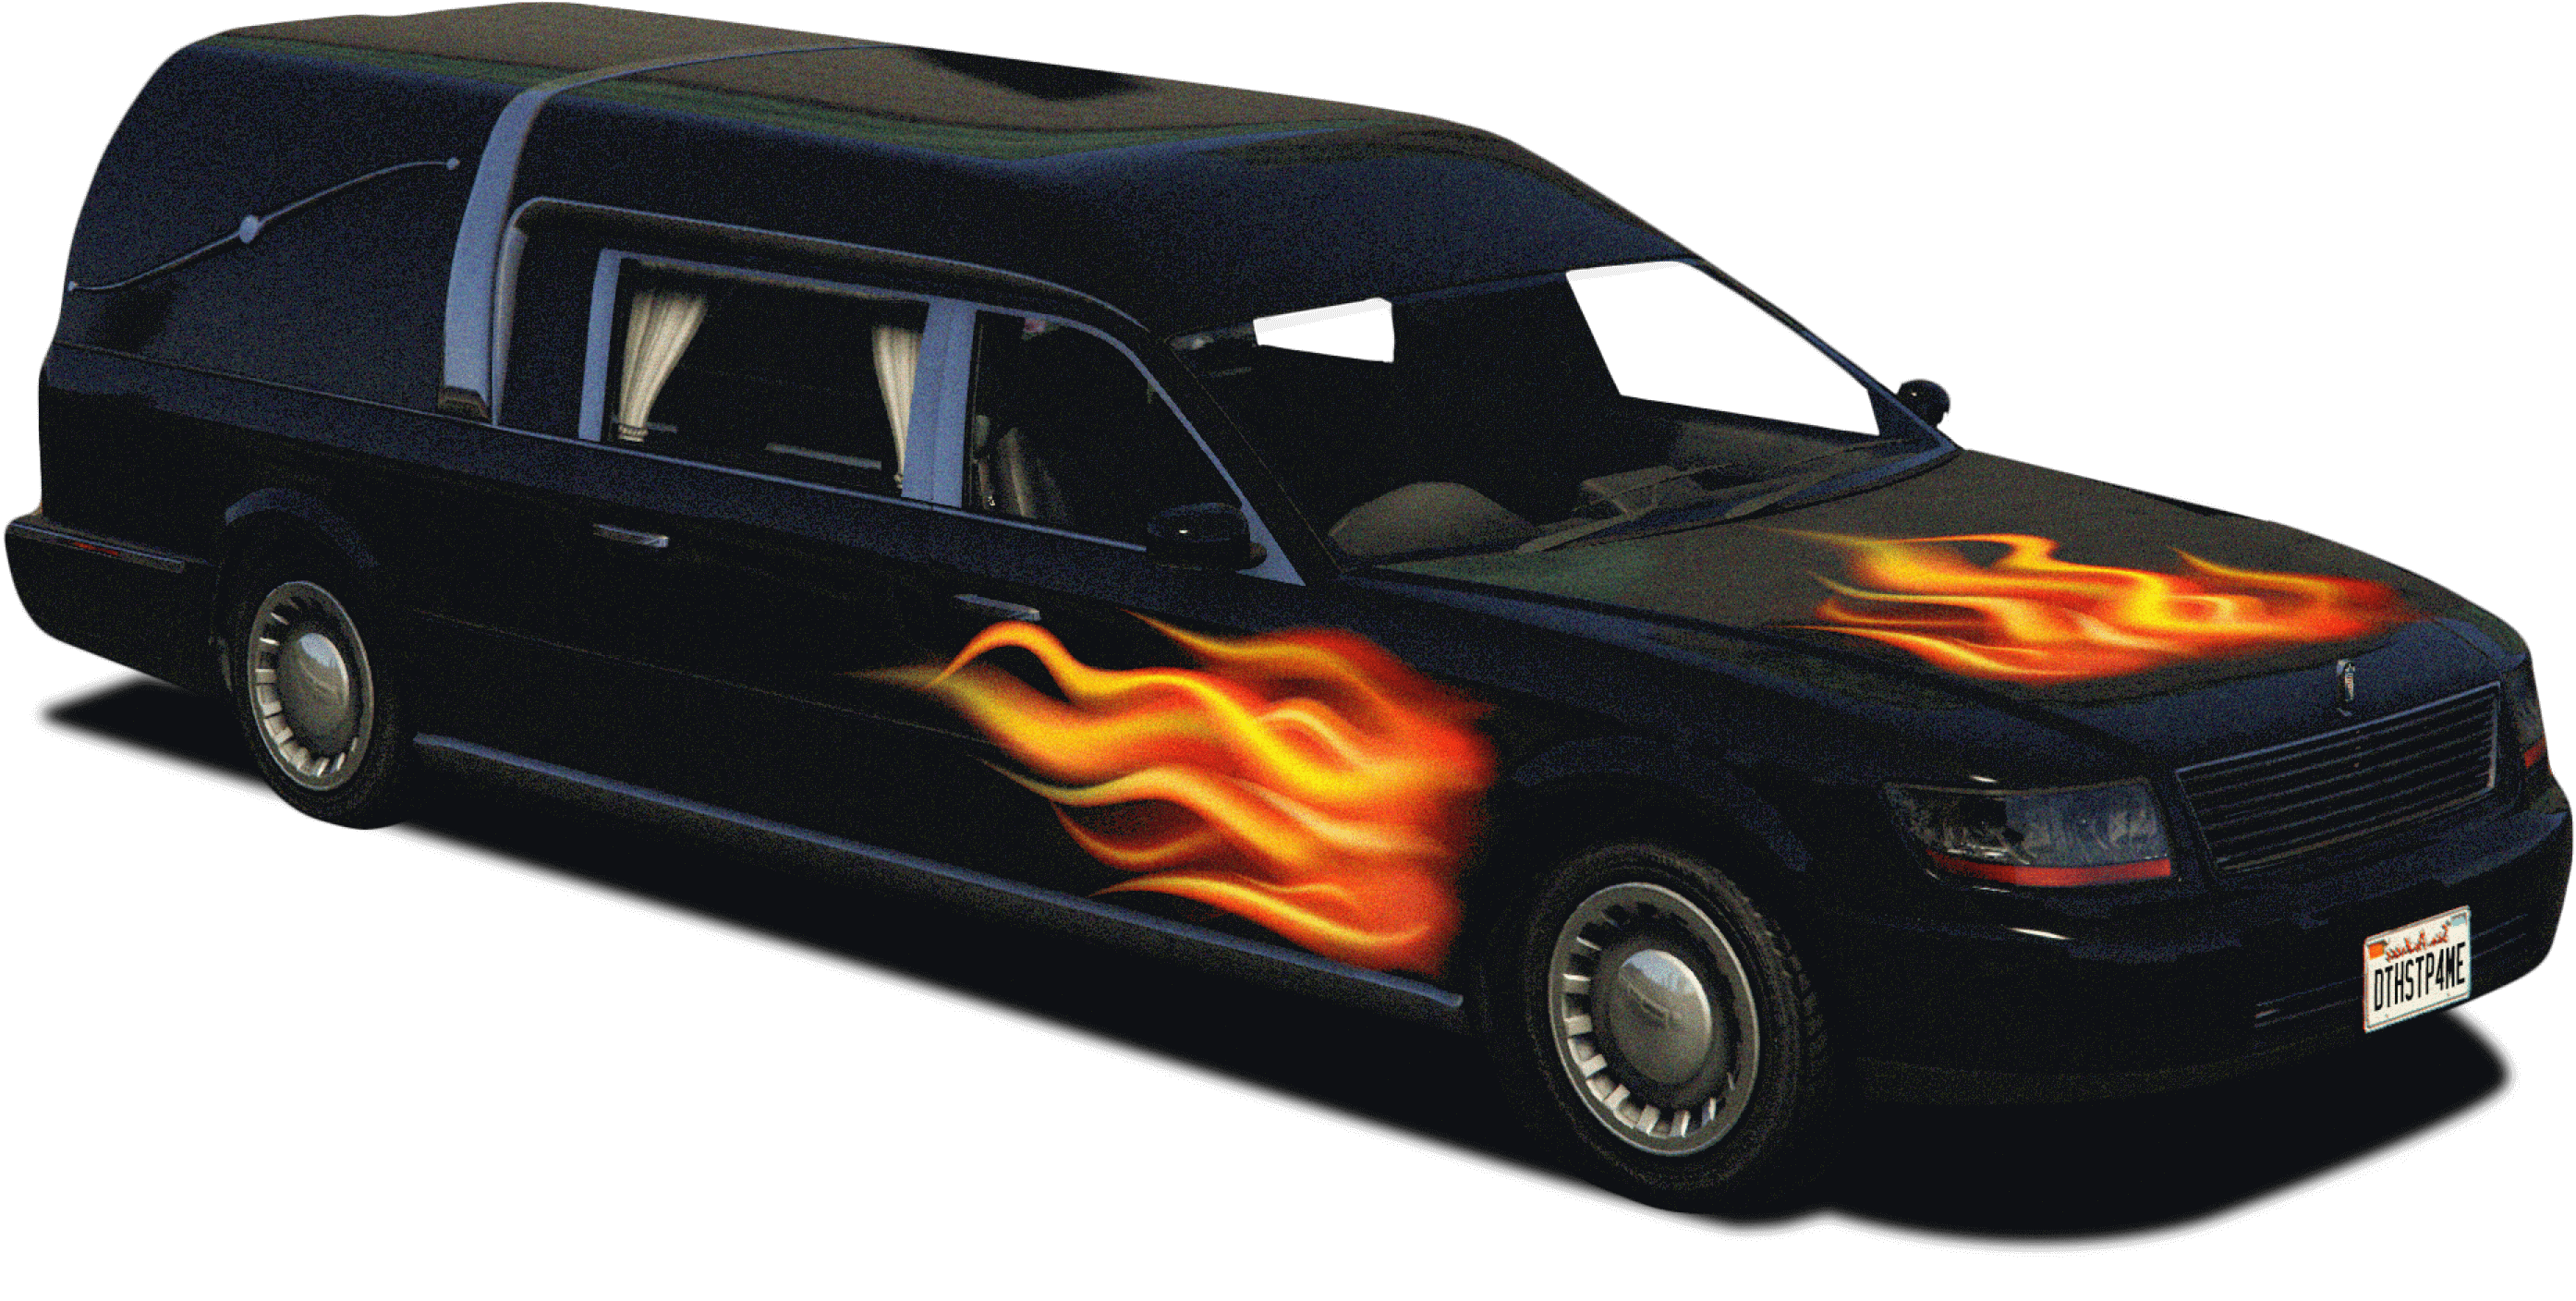 mschf uber hearse with cool fire decal